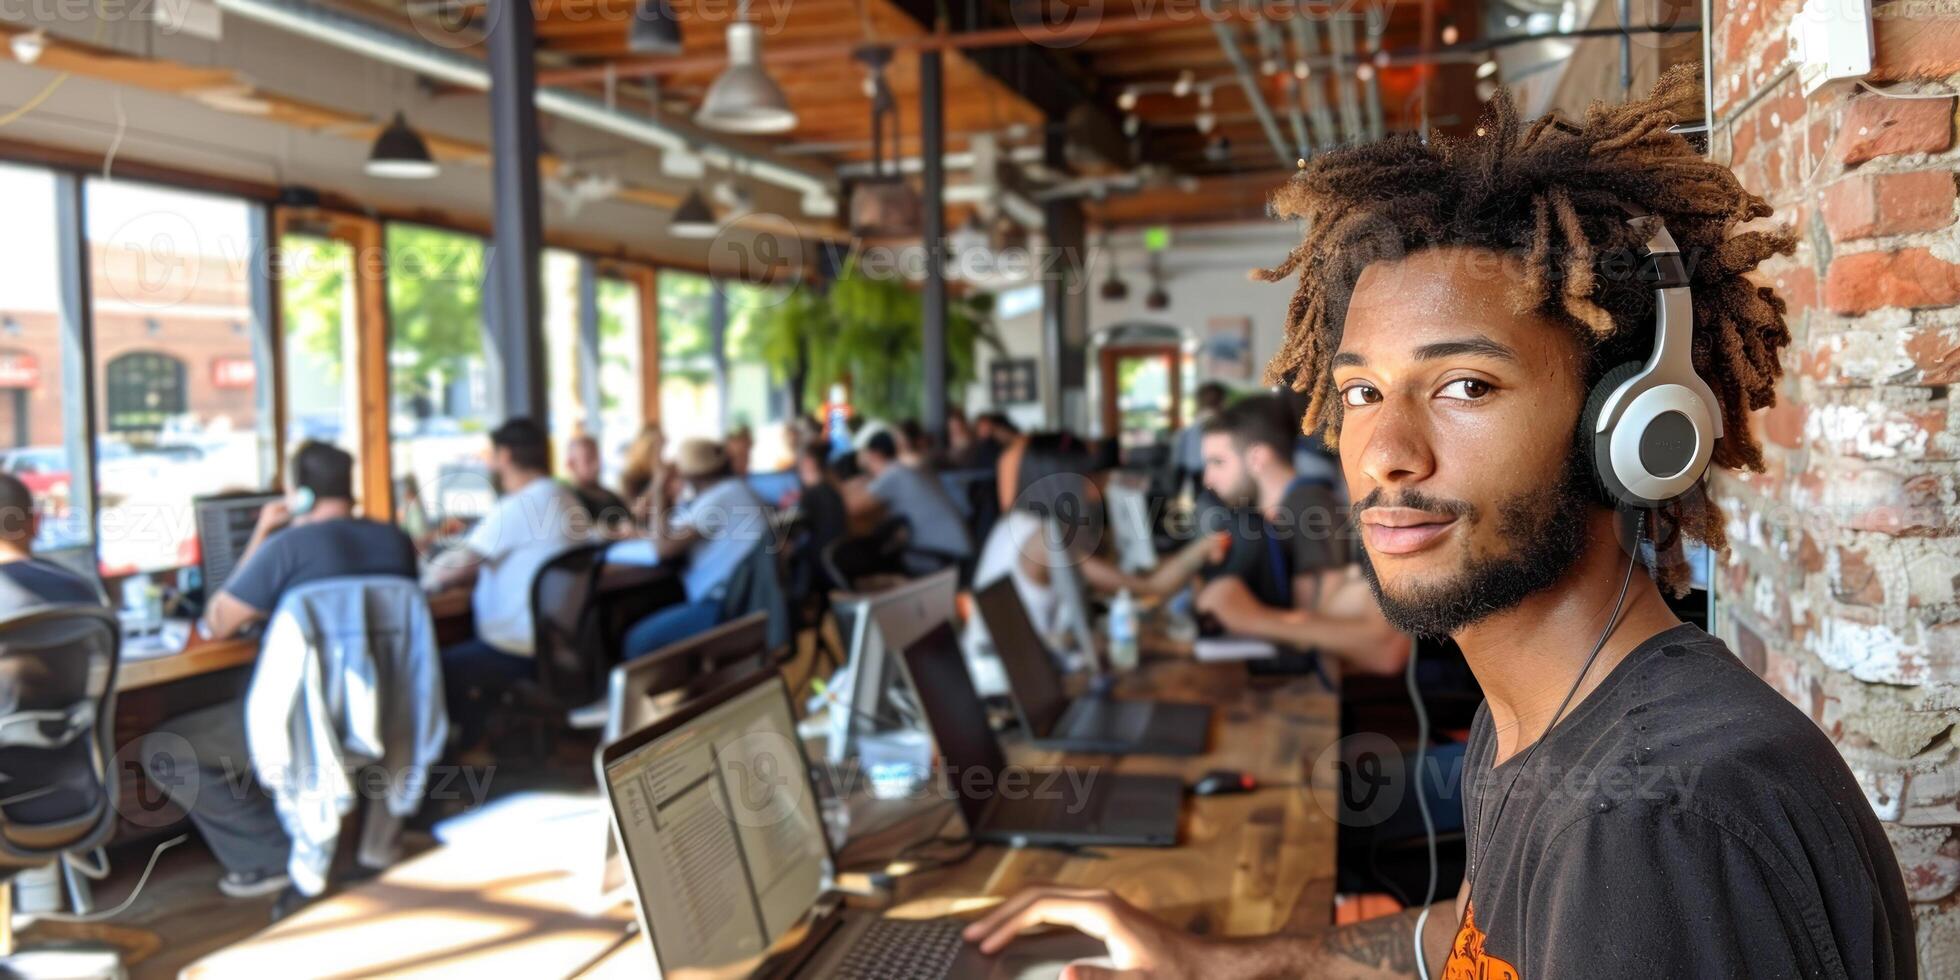 A man with dreadlocks is sitting at a desk in a room with other people photo